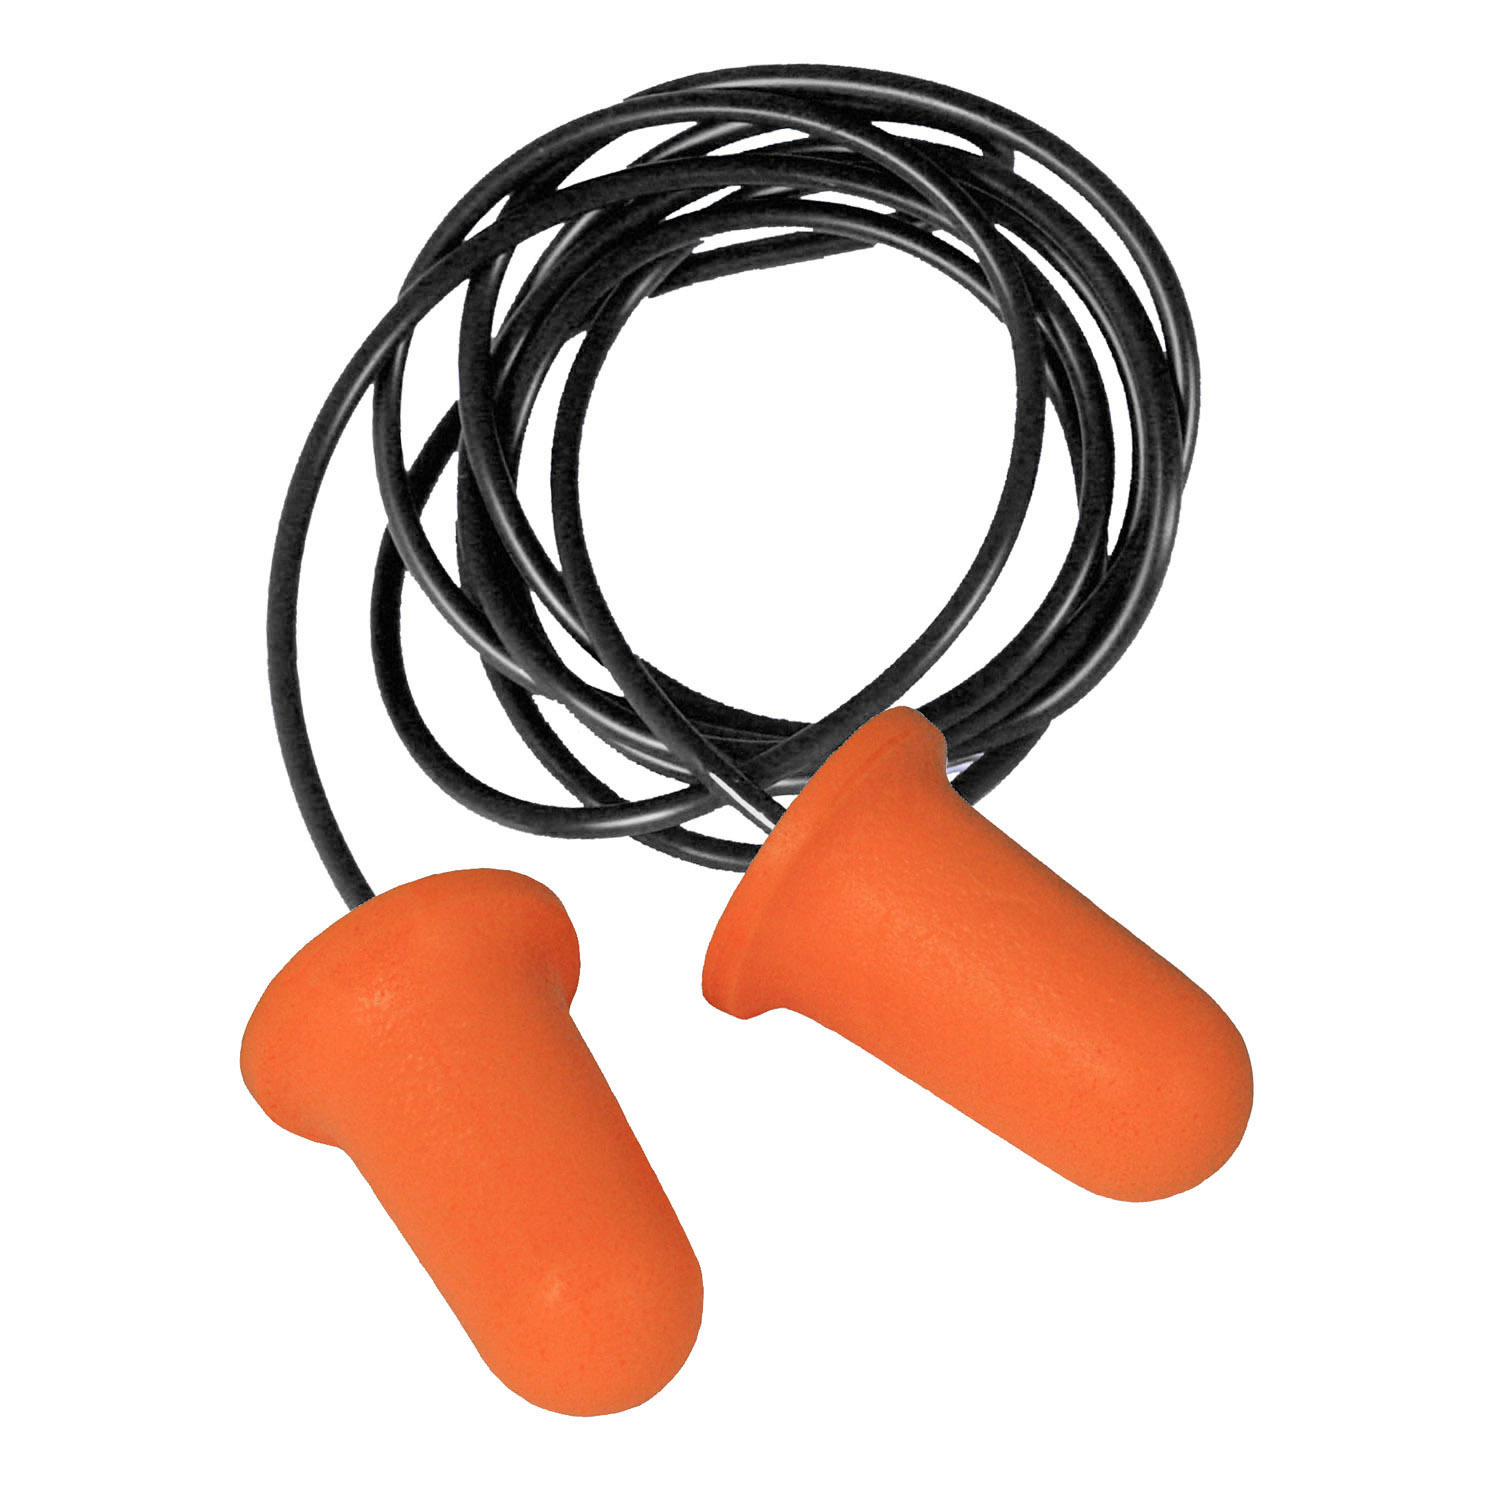 DPG65 Bell Shape Disposable Foam Earplugs - Corded - 2 Pair Blister Pack with Carry Case